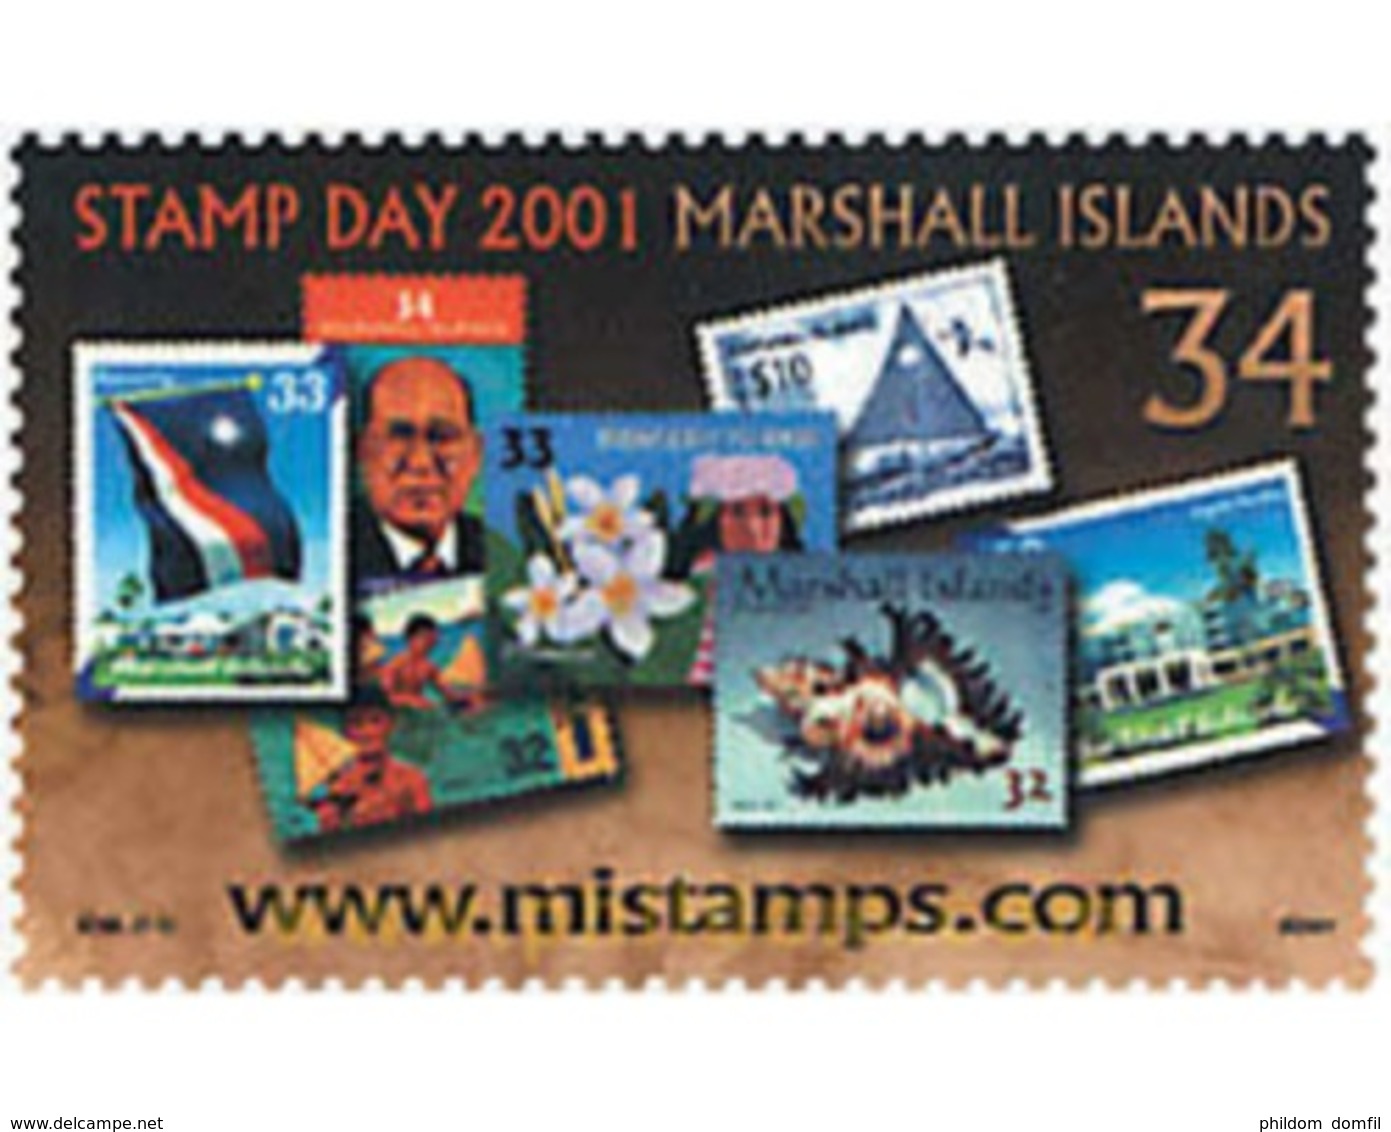 Ref. 95513 * MNH * - MARSHALL Islands. 2001. STAMP DAY . DIA DEL SELLO - Peces